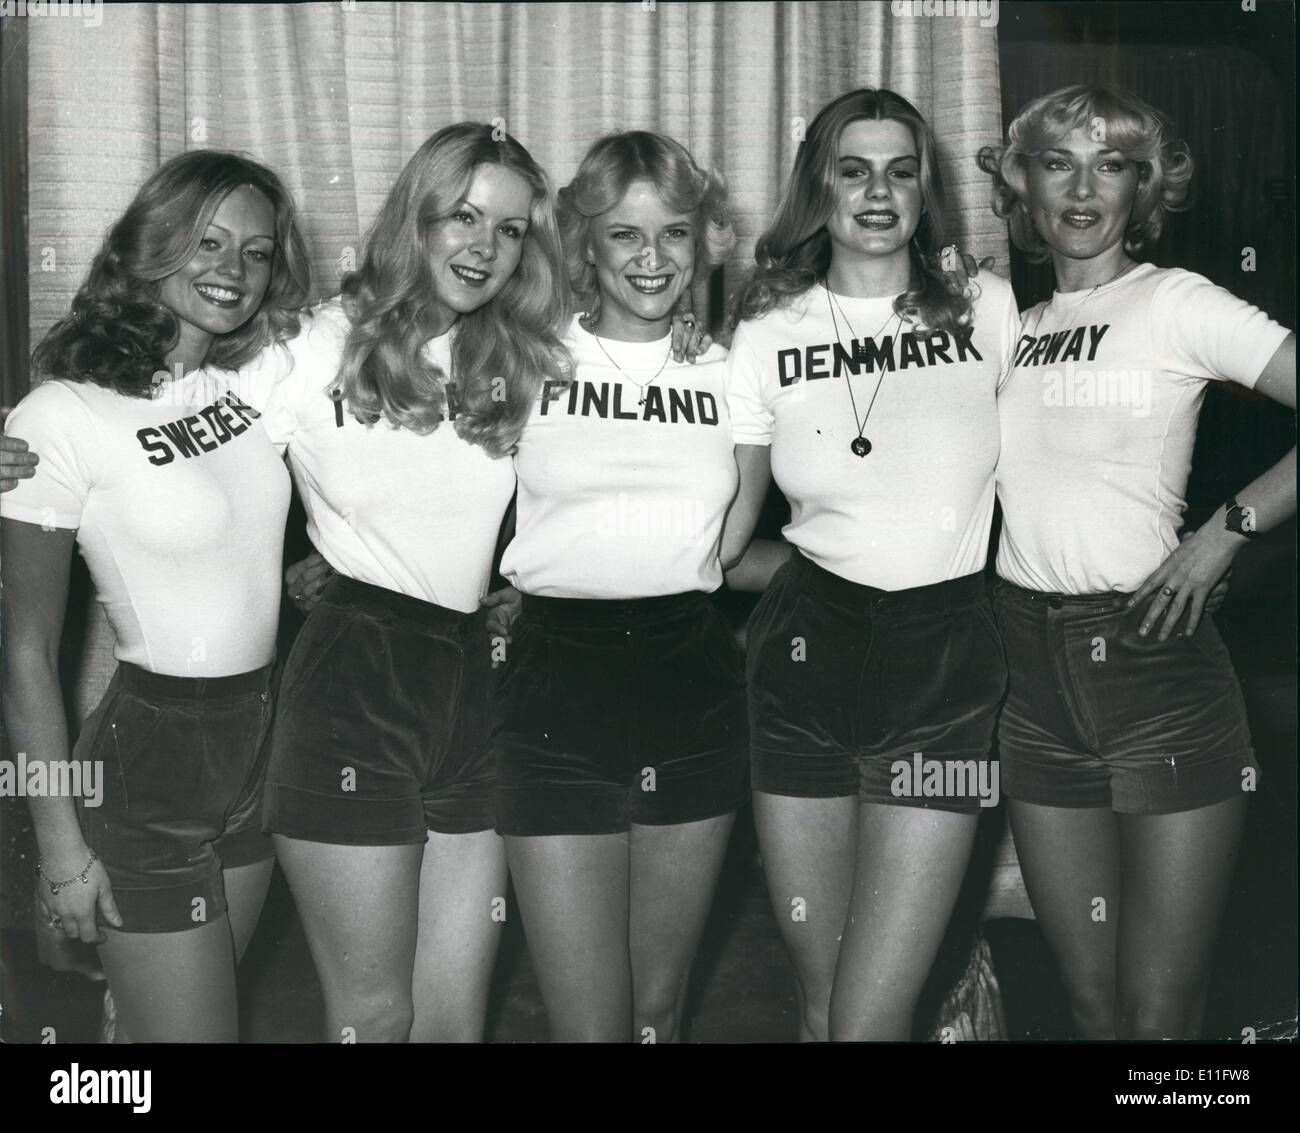 Nov. 11, 1977 - Photo Call For Miss World Contestants:A photo call was held yesterday at the Lycenm Ballroom in the Strand for all the contestants of the Miss World Competition which will be held at the Royal Albert Hall this Thursday 17th Nov. Photo shows Five of the contestants (L-R) Miss Sweden-Mamy Stavins, Miss Iceland-Dilly Sigurlaug Hall Dorsdottir, Miss Finland-Asta Seppala, Miss Denmark-Anette Dybdal, and Miss Norway-Ashild Jenny Ottensen. Stock Photo